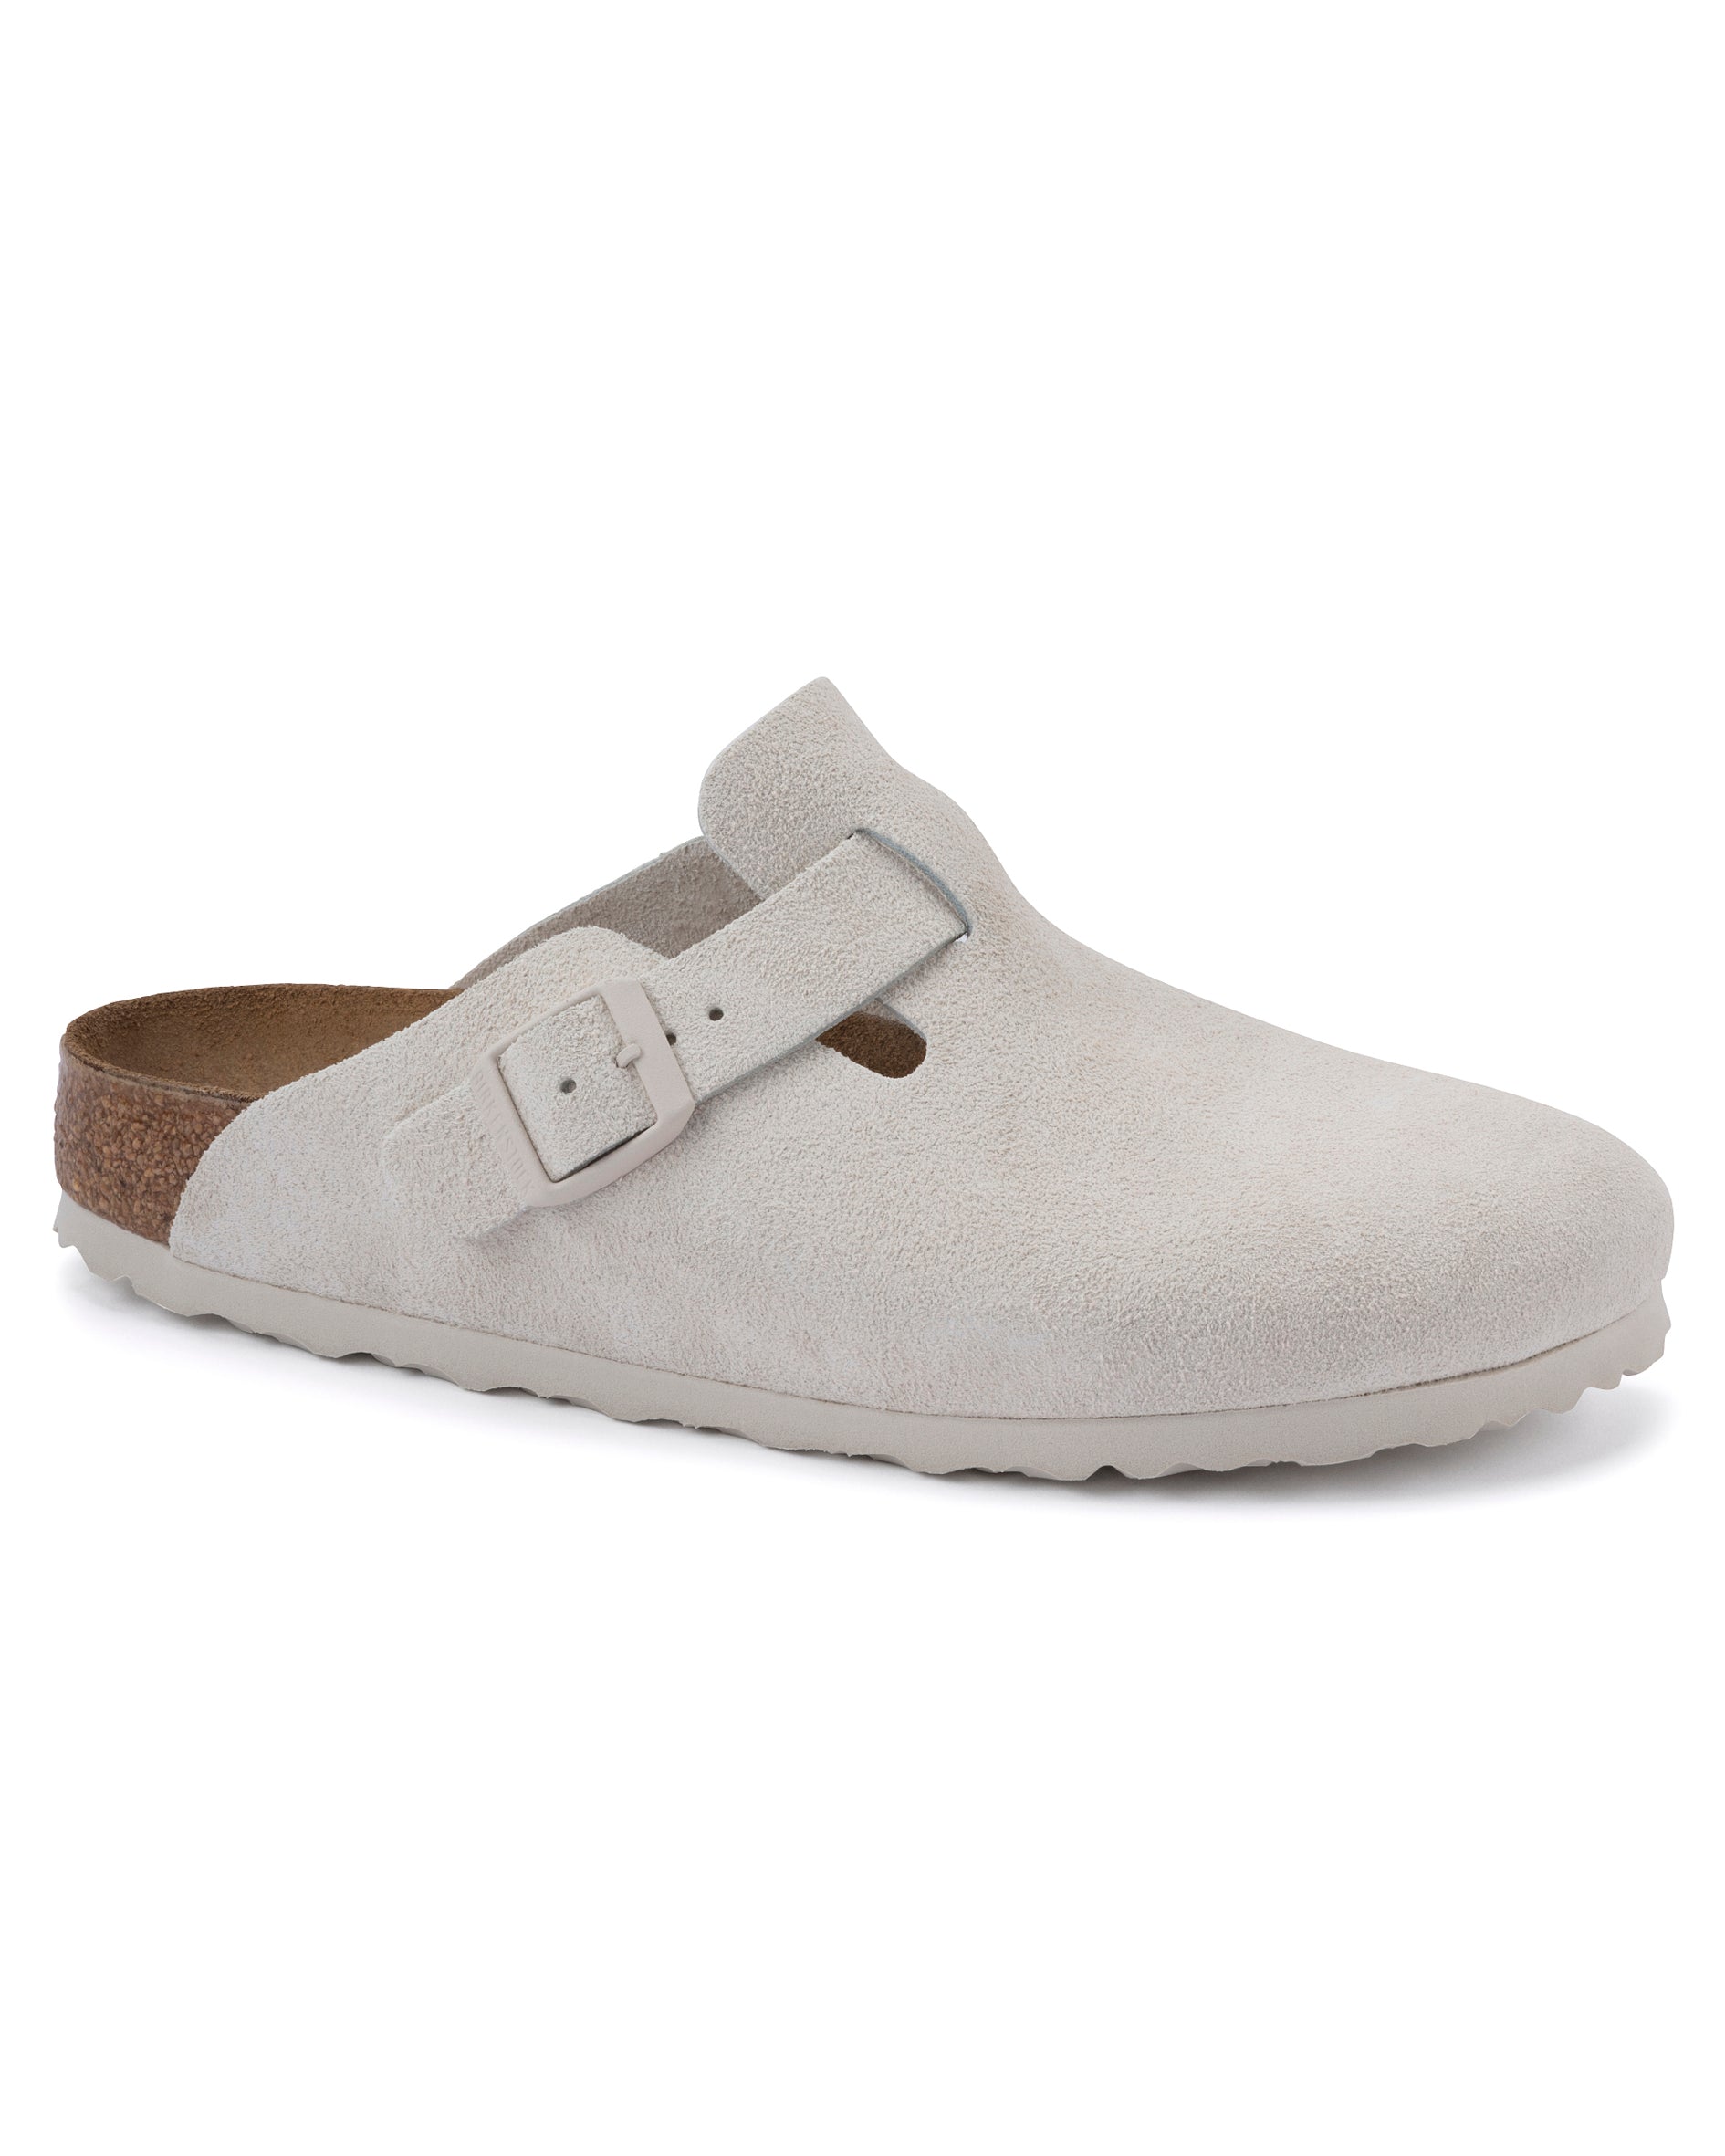 Boston Antique White Suede Leather Clogs